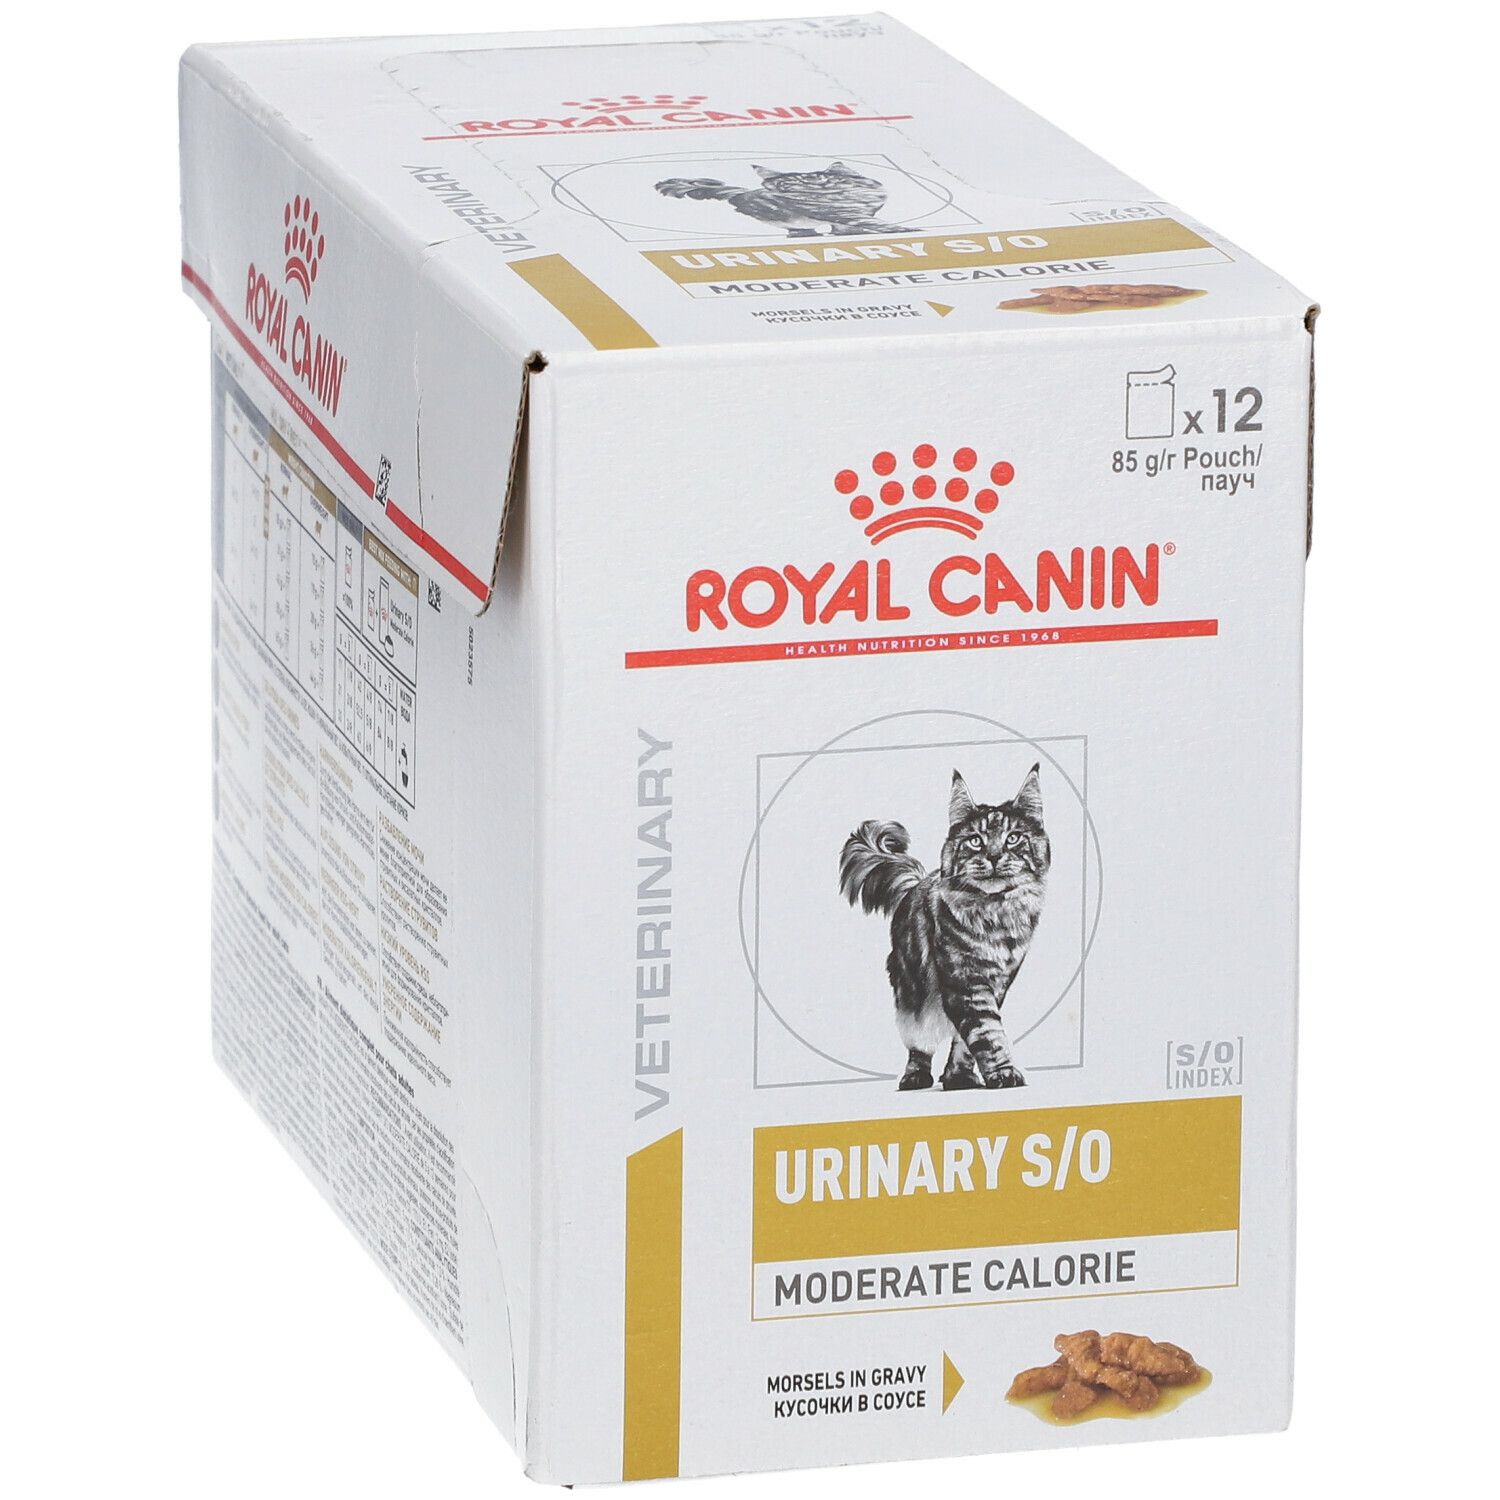 ROYAL CANIN® Urinary S/O Moderate Calorie